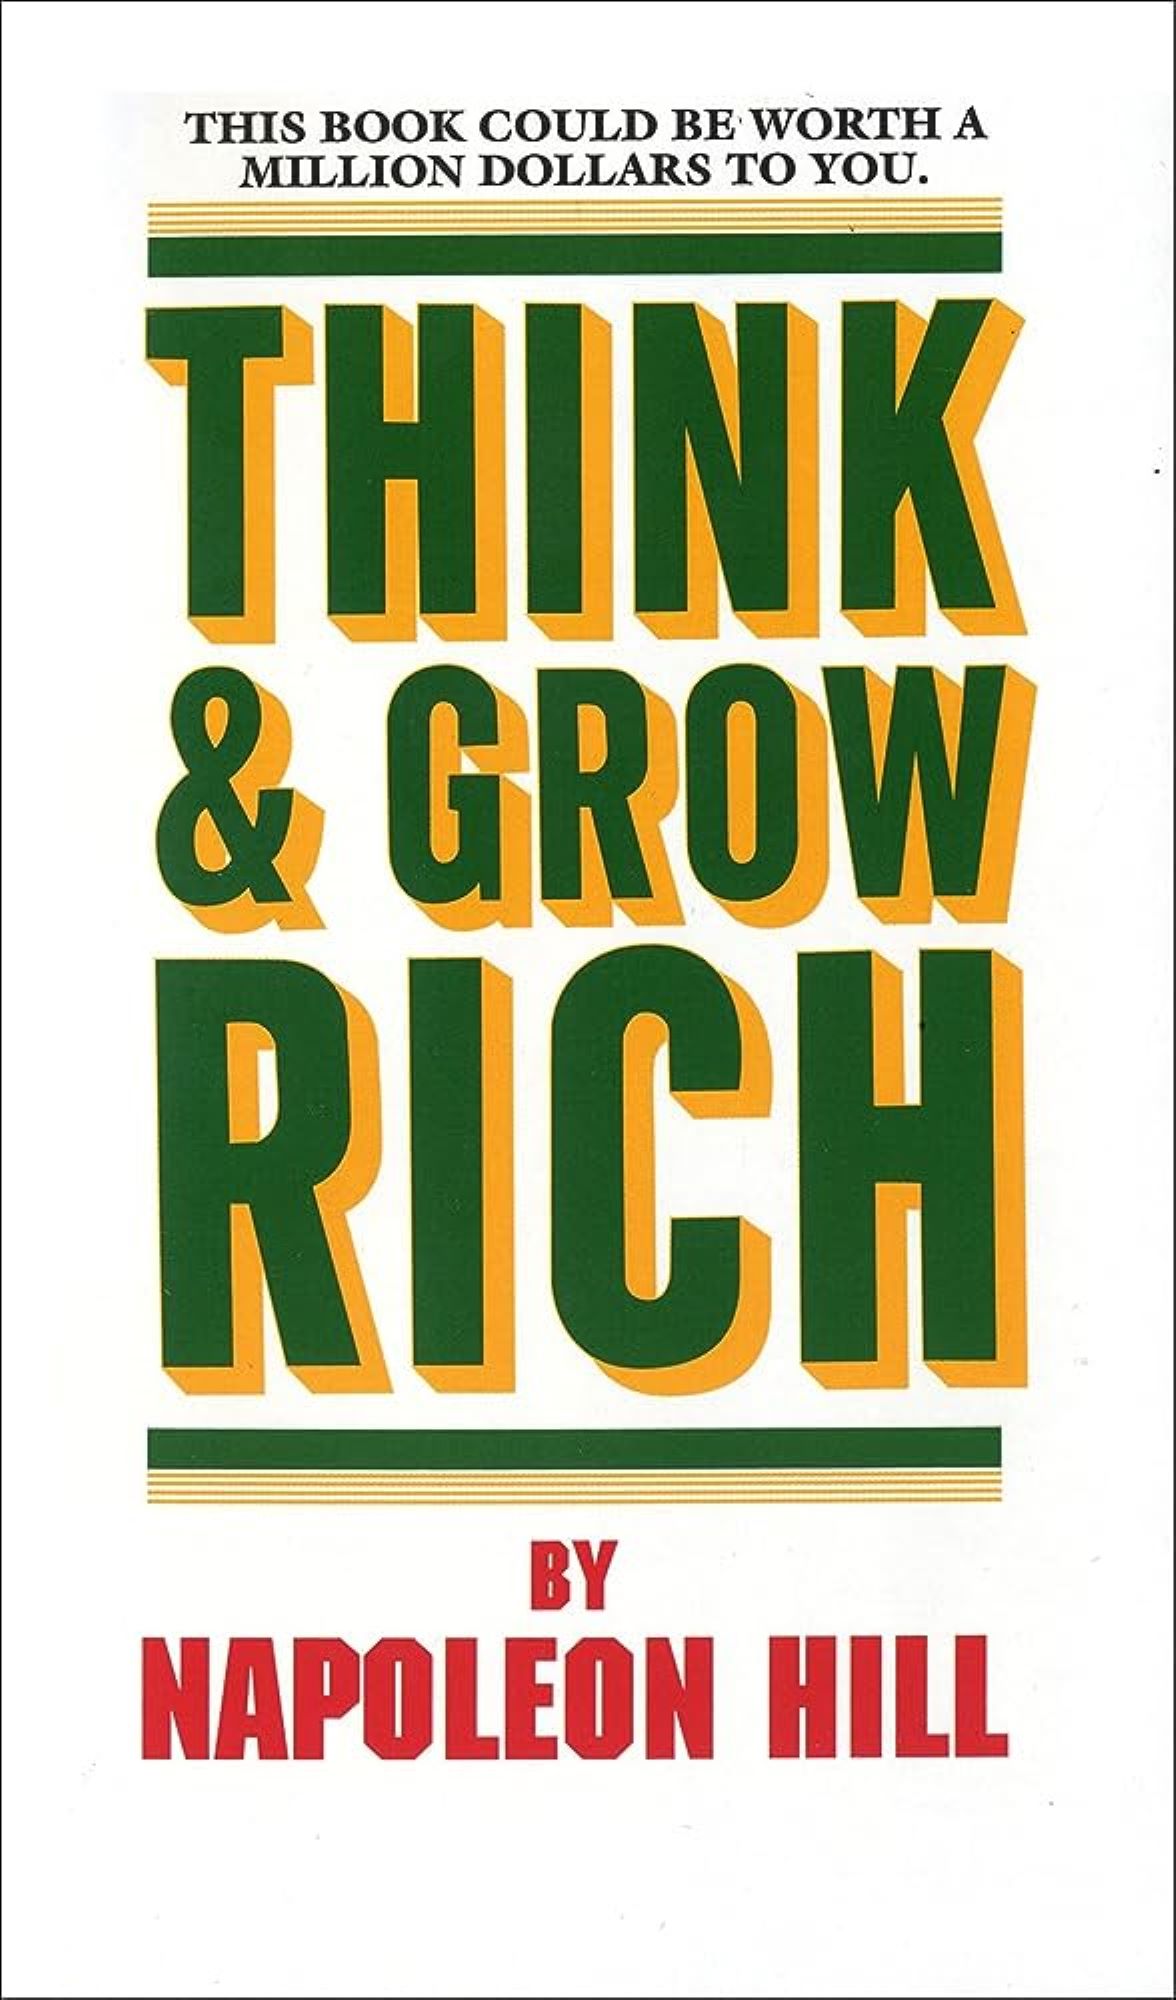 Think and Grow Rich book cover